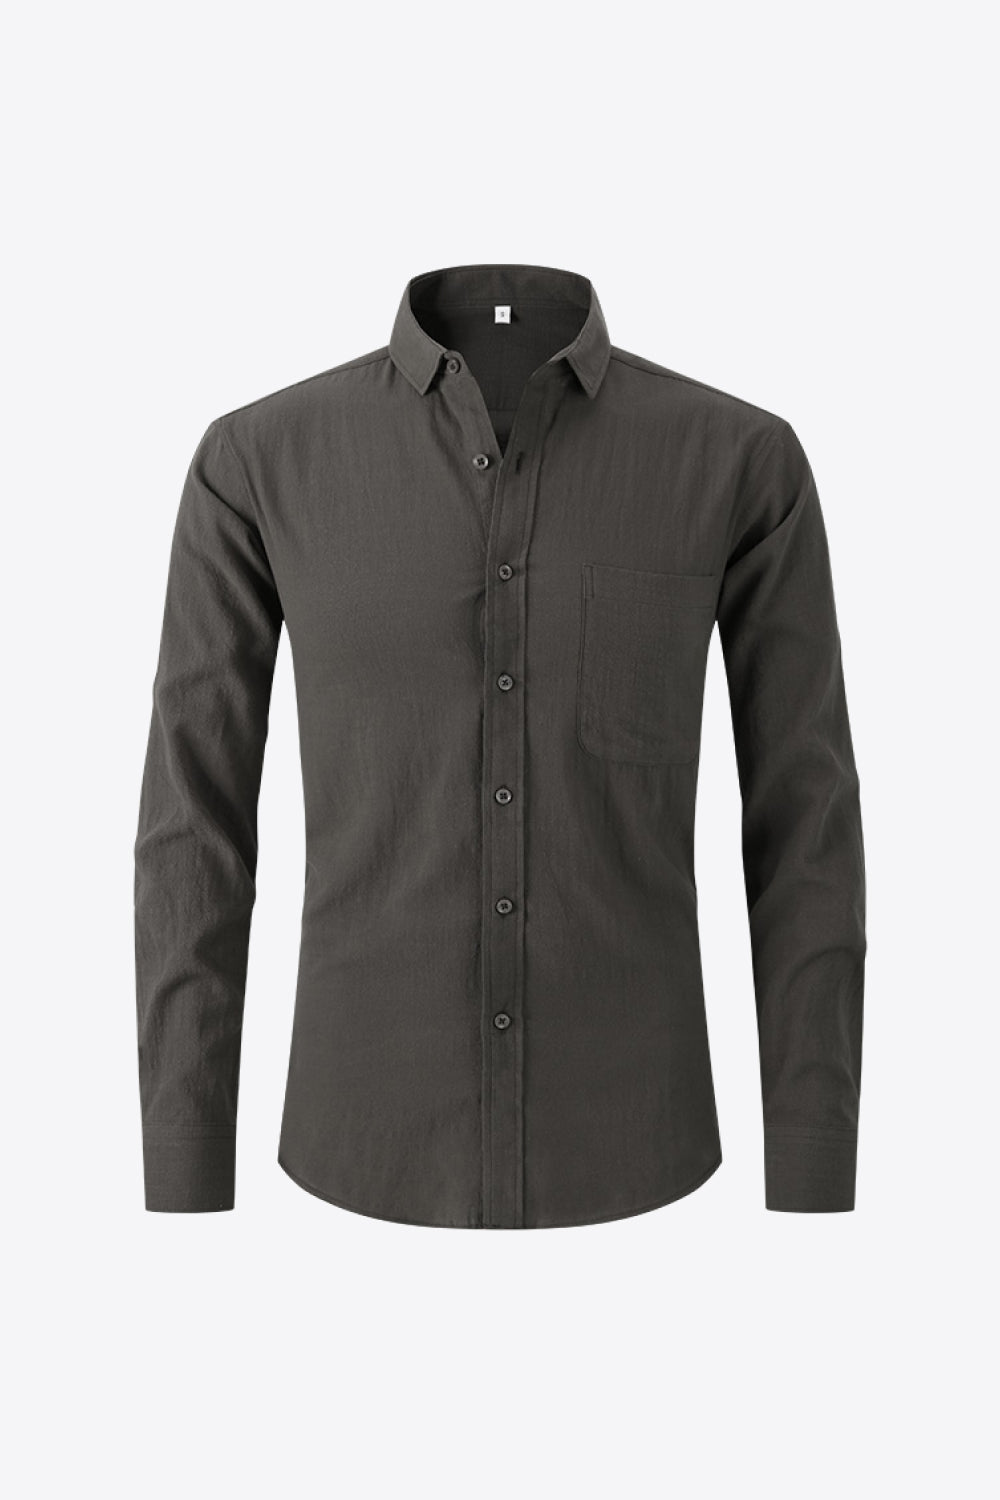 All Men's Clothing and Apparel - Carbone's Marketplace